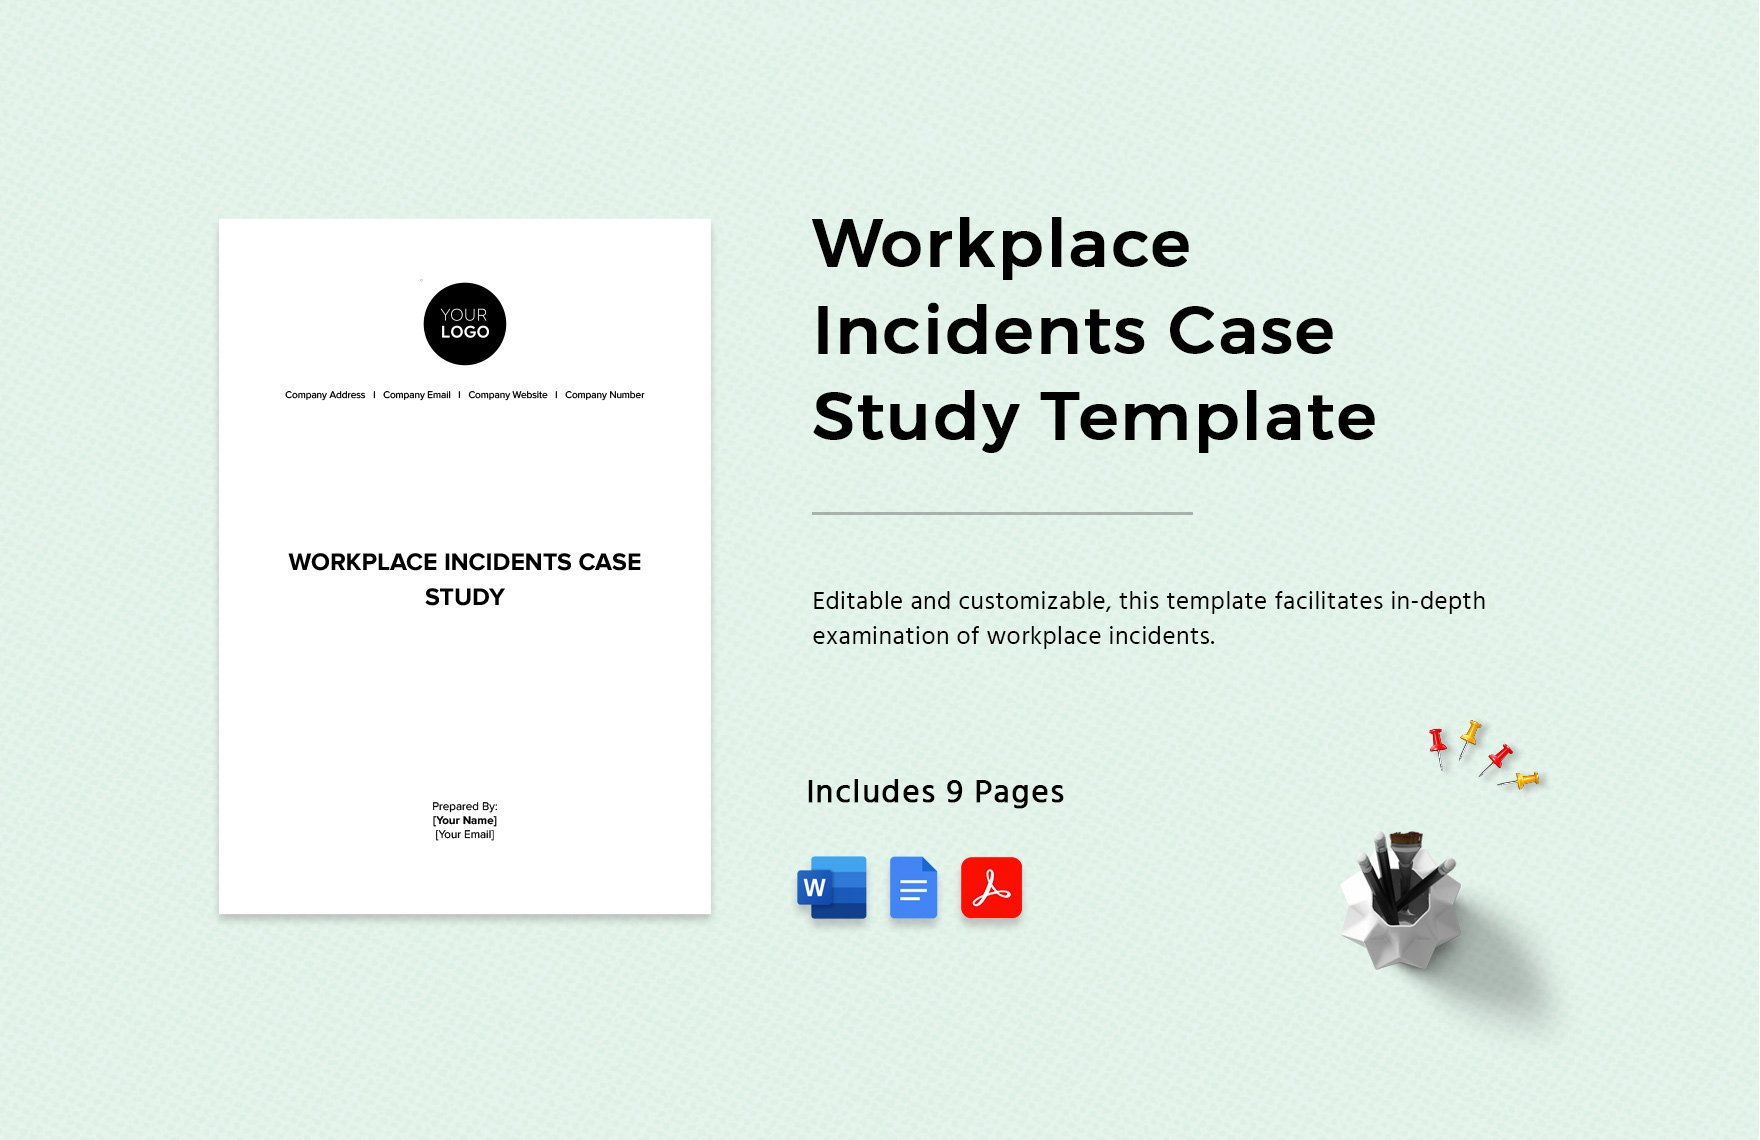 Workplace Incidents Case Study Template